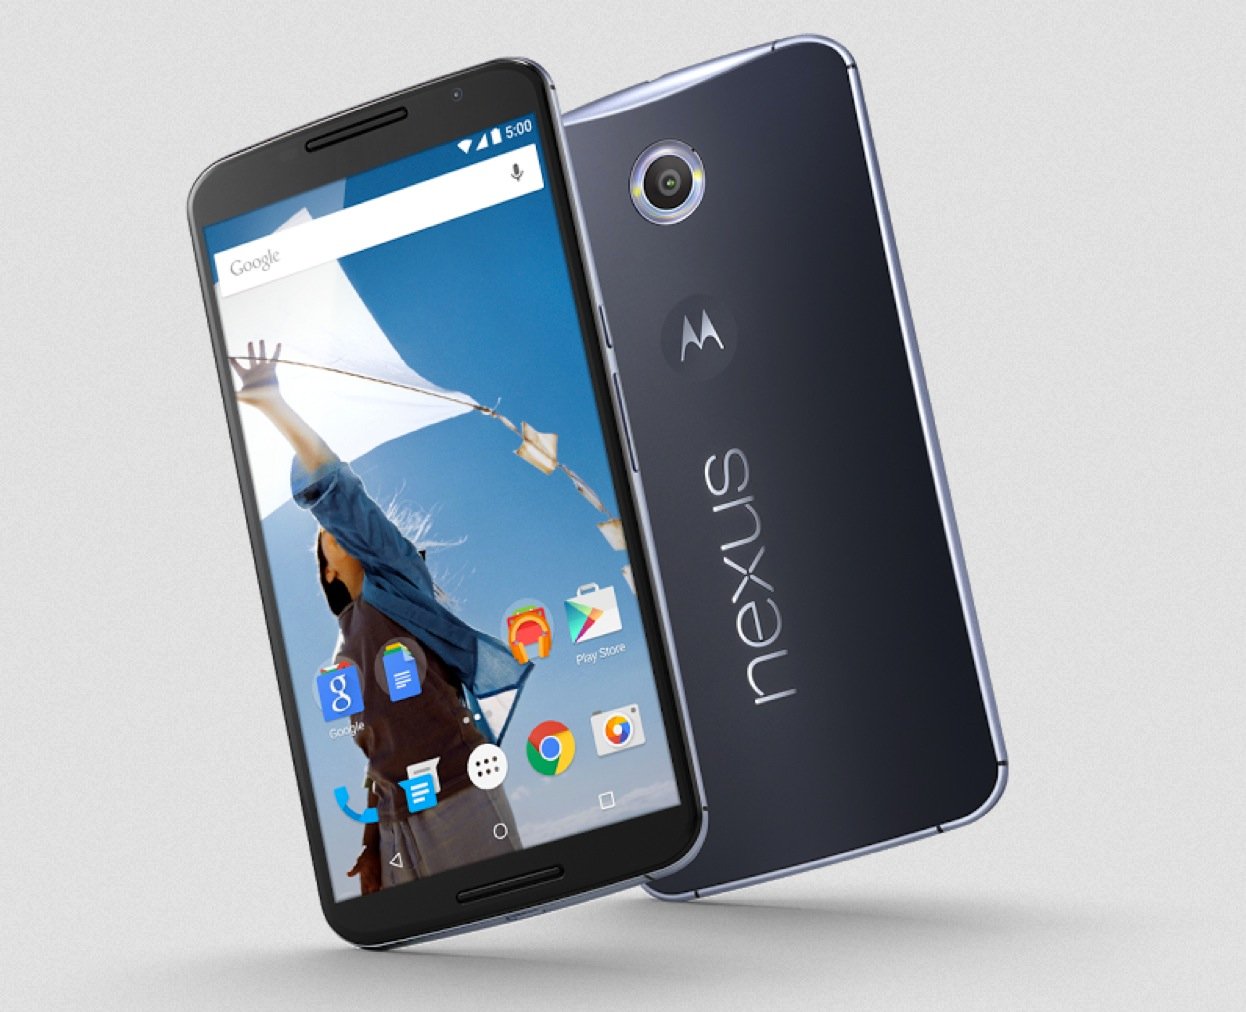 Last minute Nexus 6 release tips for users who will pre-order.